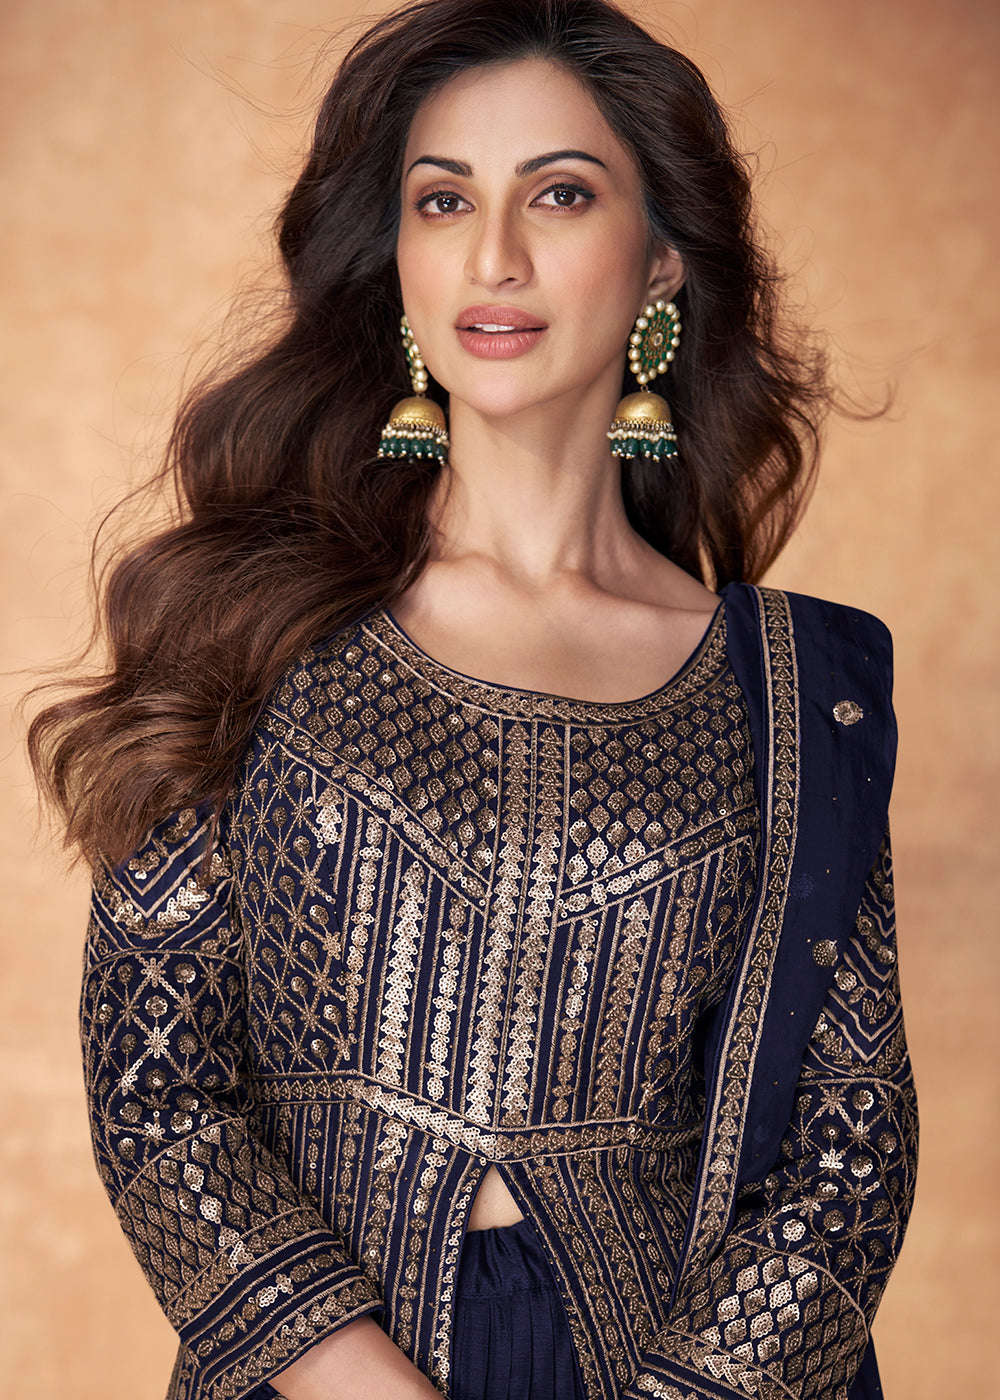 Buy Now Navy Blue Skirt Style Embroidered Wedding Anarkali Suit Online in USA, UK, Australia, New Zealand, Canada & Worldwide at Empress Clothing. 